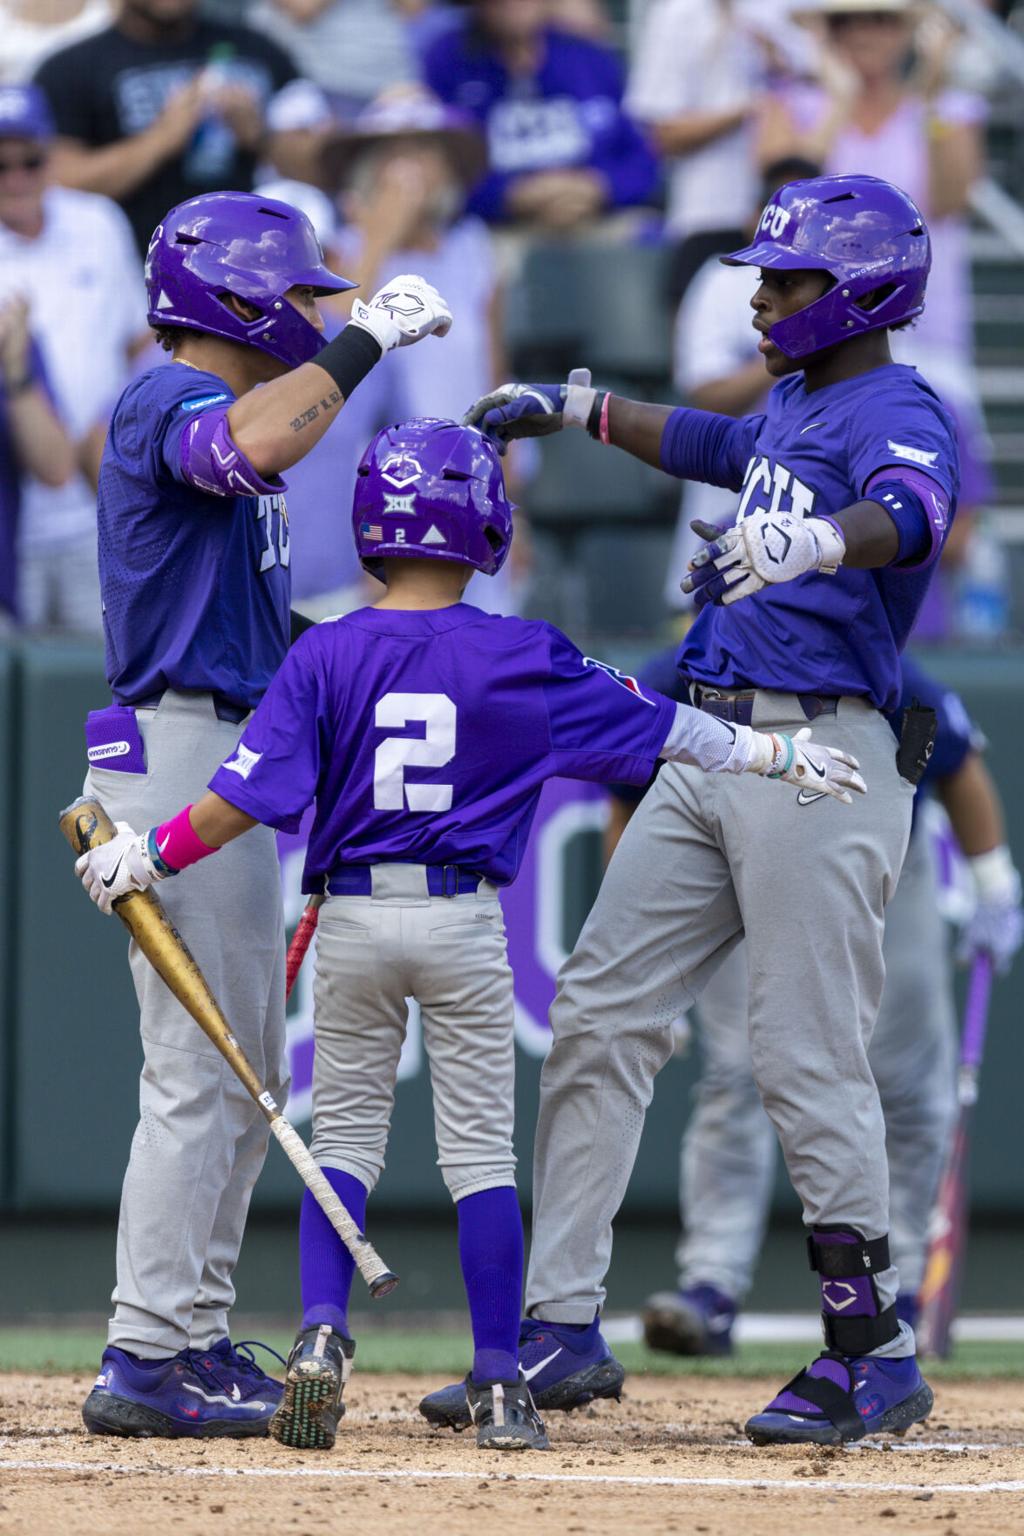 TCU's Klecker shuts down Indiana State in 4-1 win to open Fort